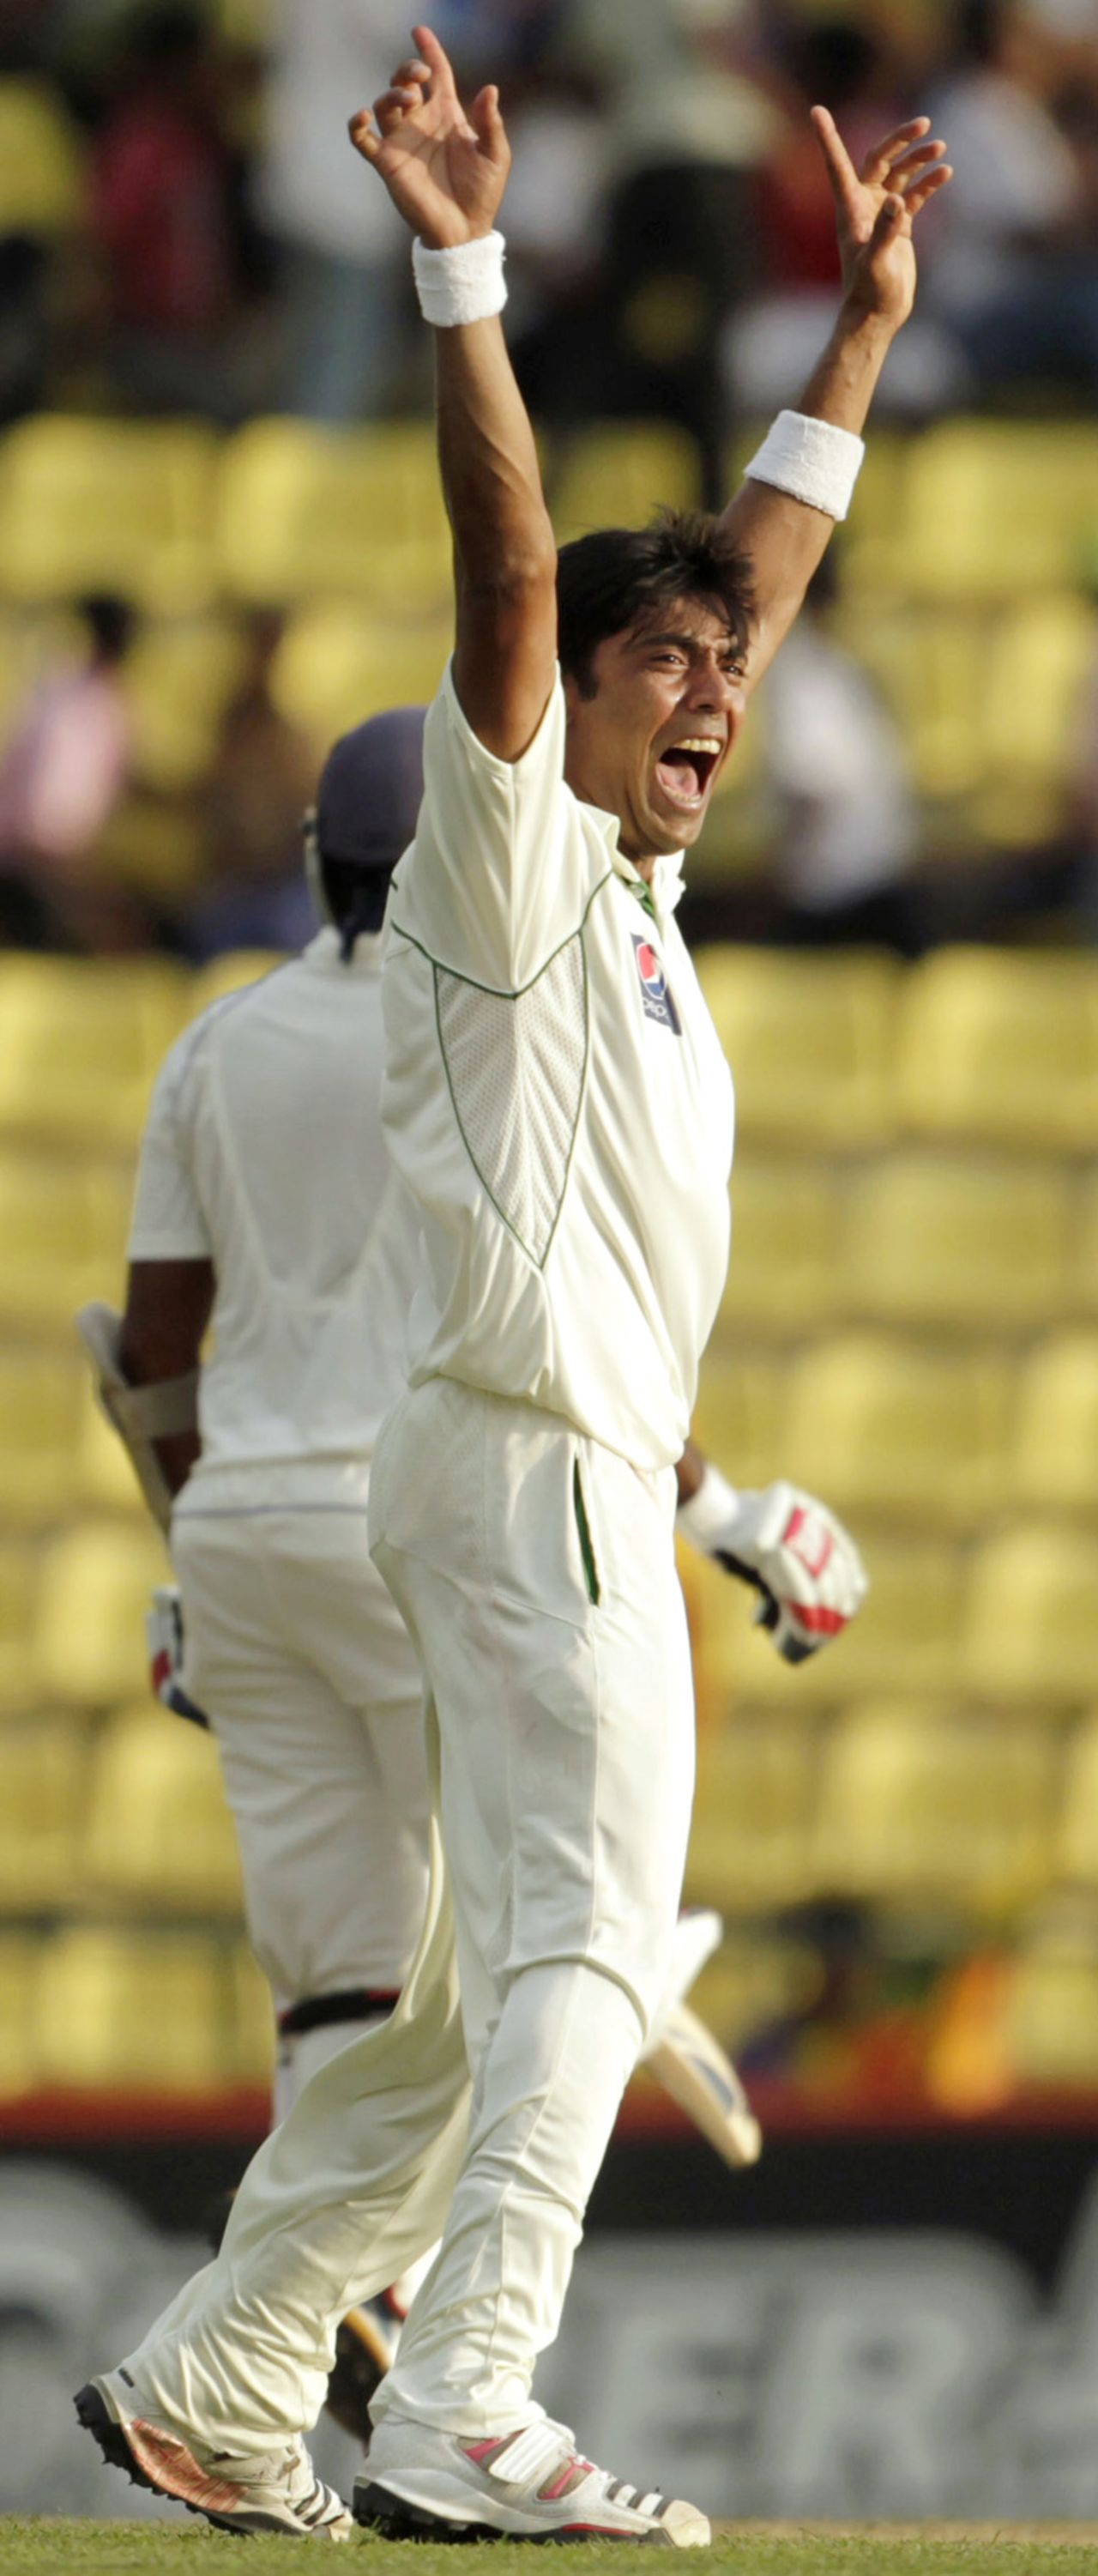 Mohammad Sami appeals in his first Test for 19 months, Sri Lanka v Pakistan, 3rd Test, Pallekele, 1st day, July 8, 2012